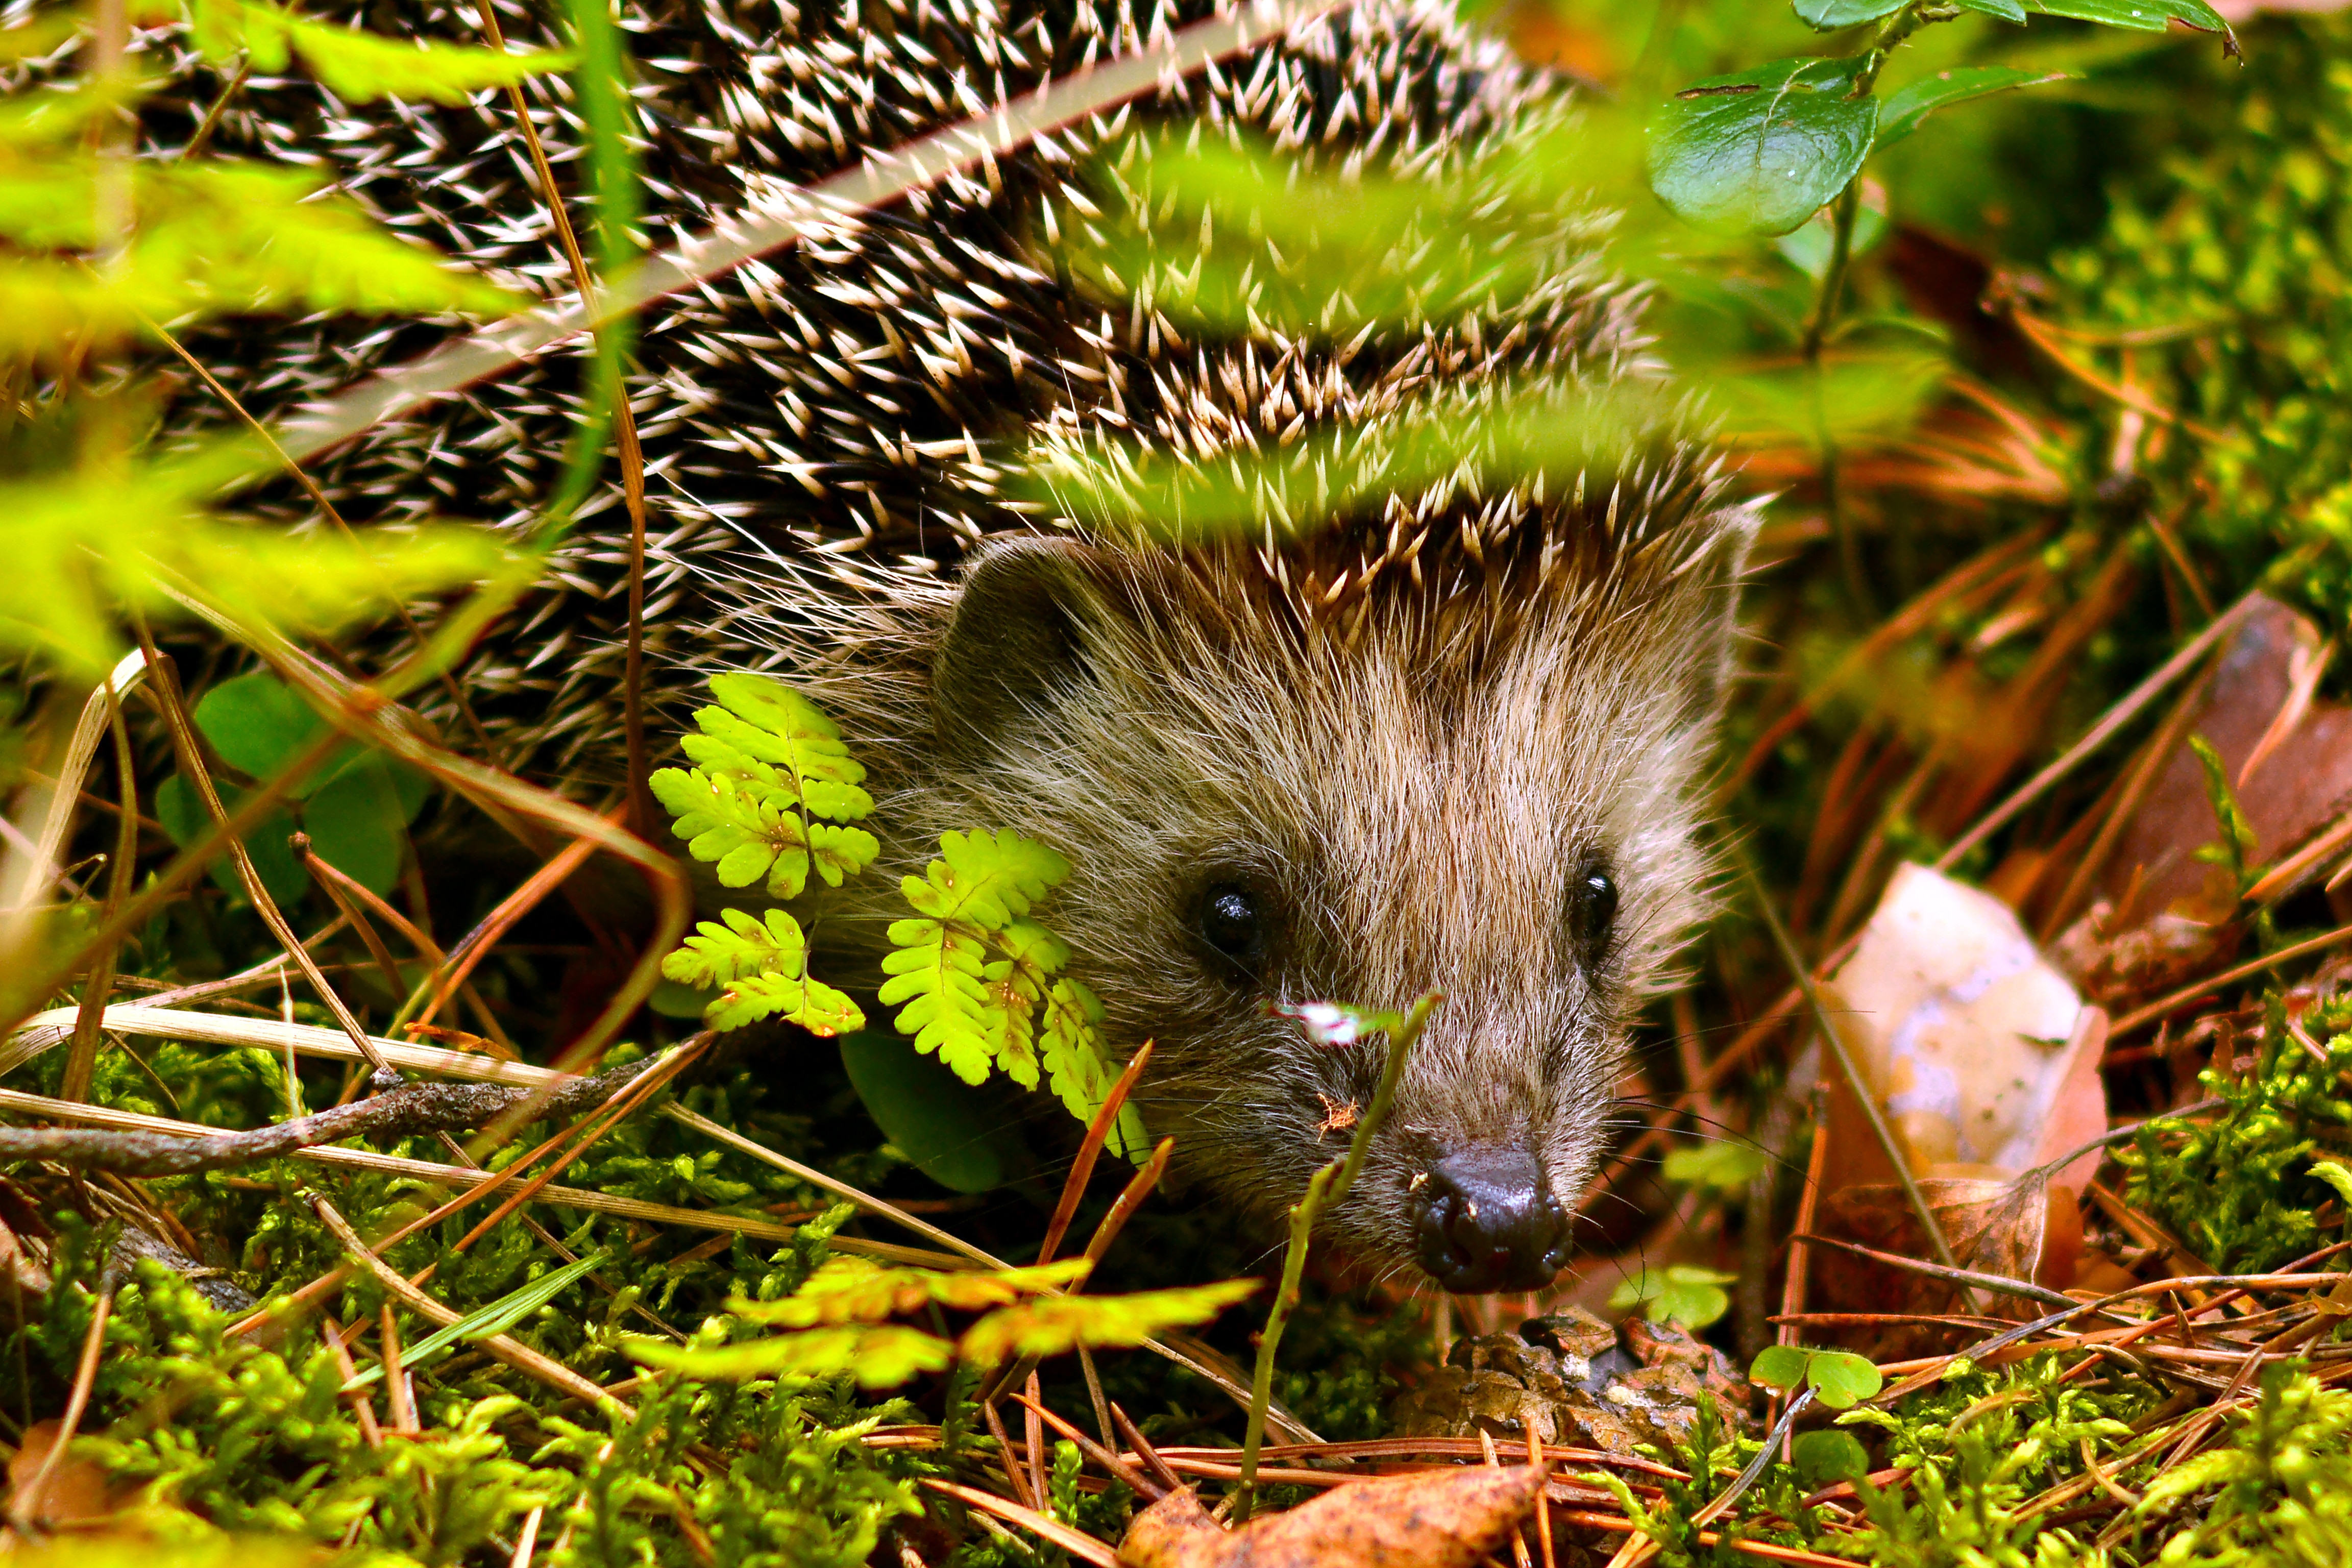 A small hedgehog (lat. Erinaceus europaeus) looks out from under the grass in a pine forest.